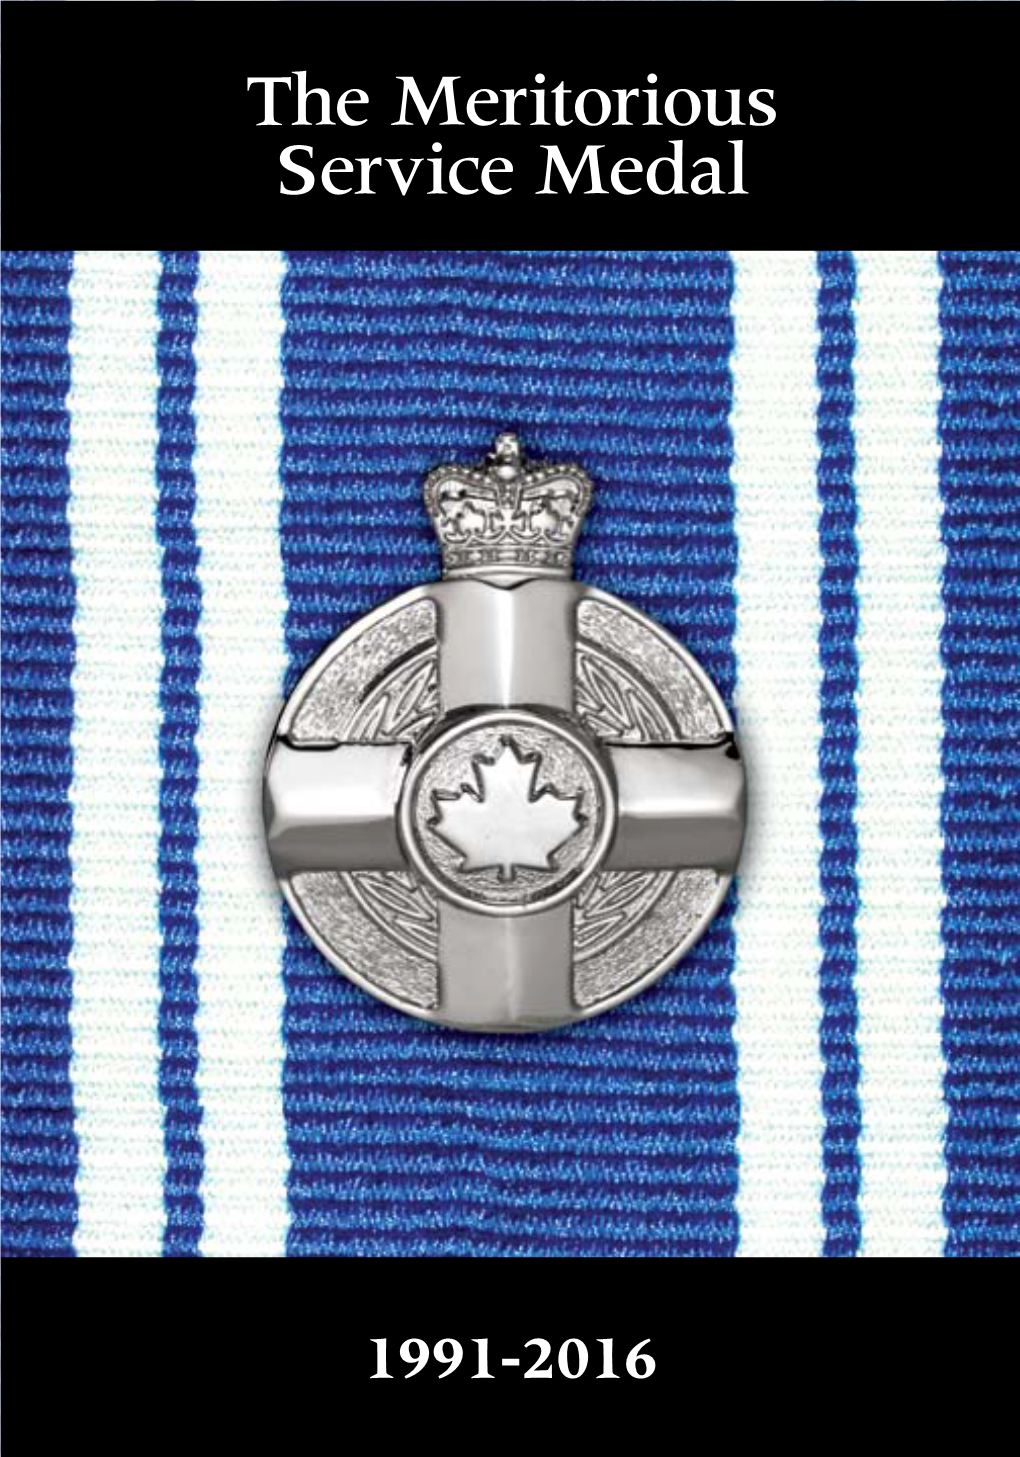 The Meritorious Service Medal 1991-2016